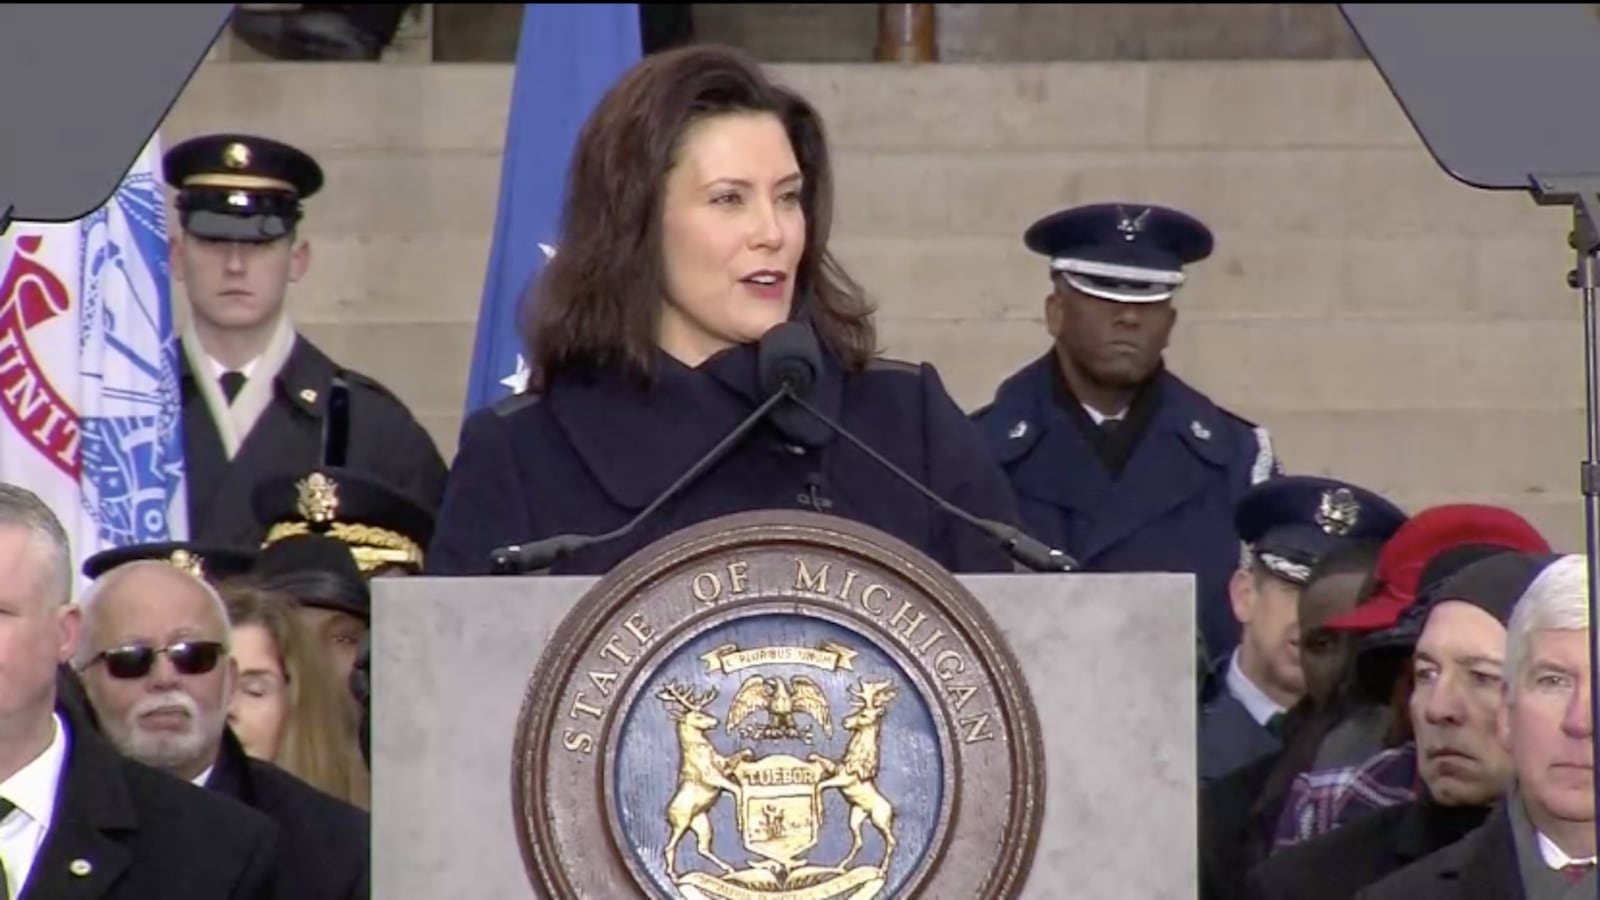 Michigan Gov. Gretchen Whitmer vowed to improve schools during her swearing-in ceremony on January 1, 2019.